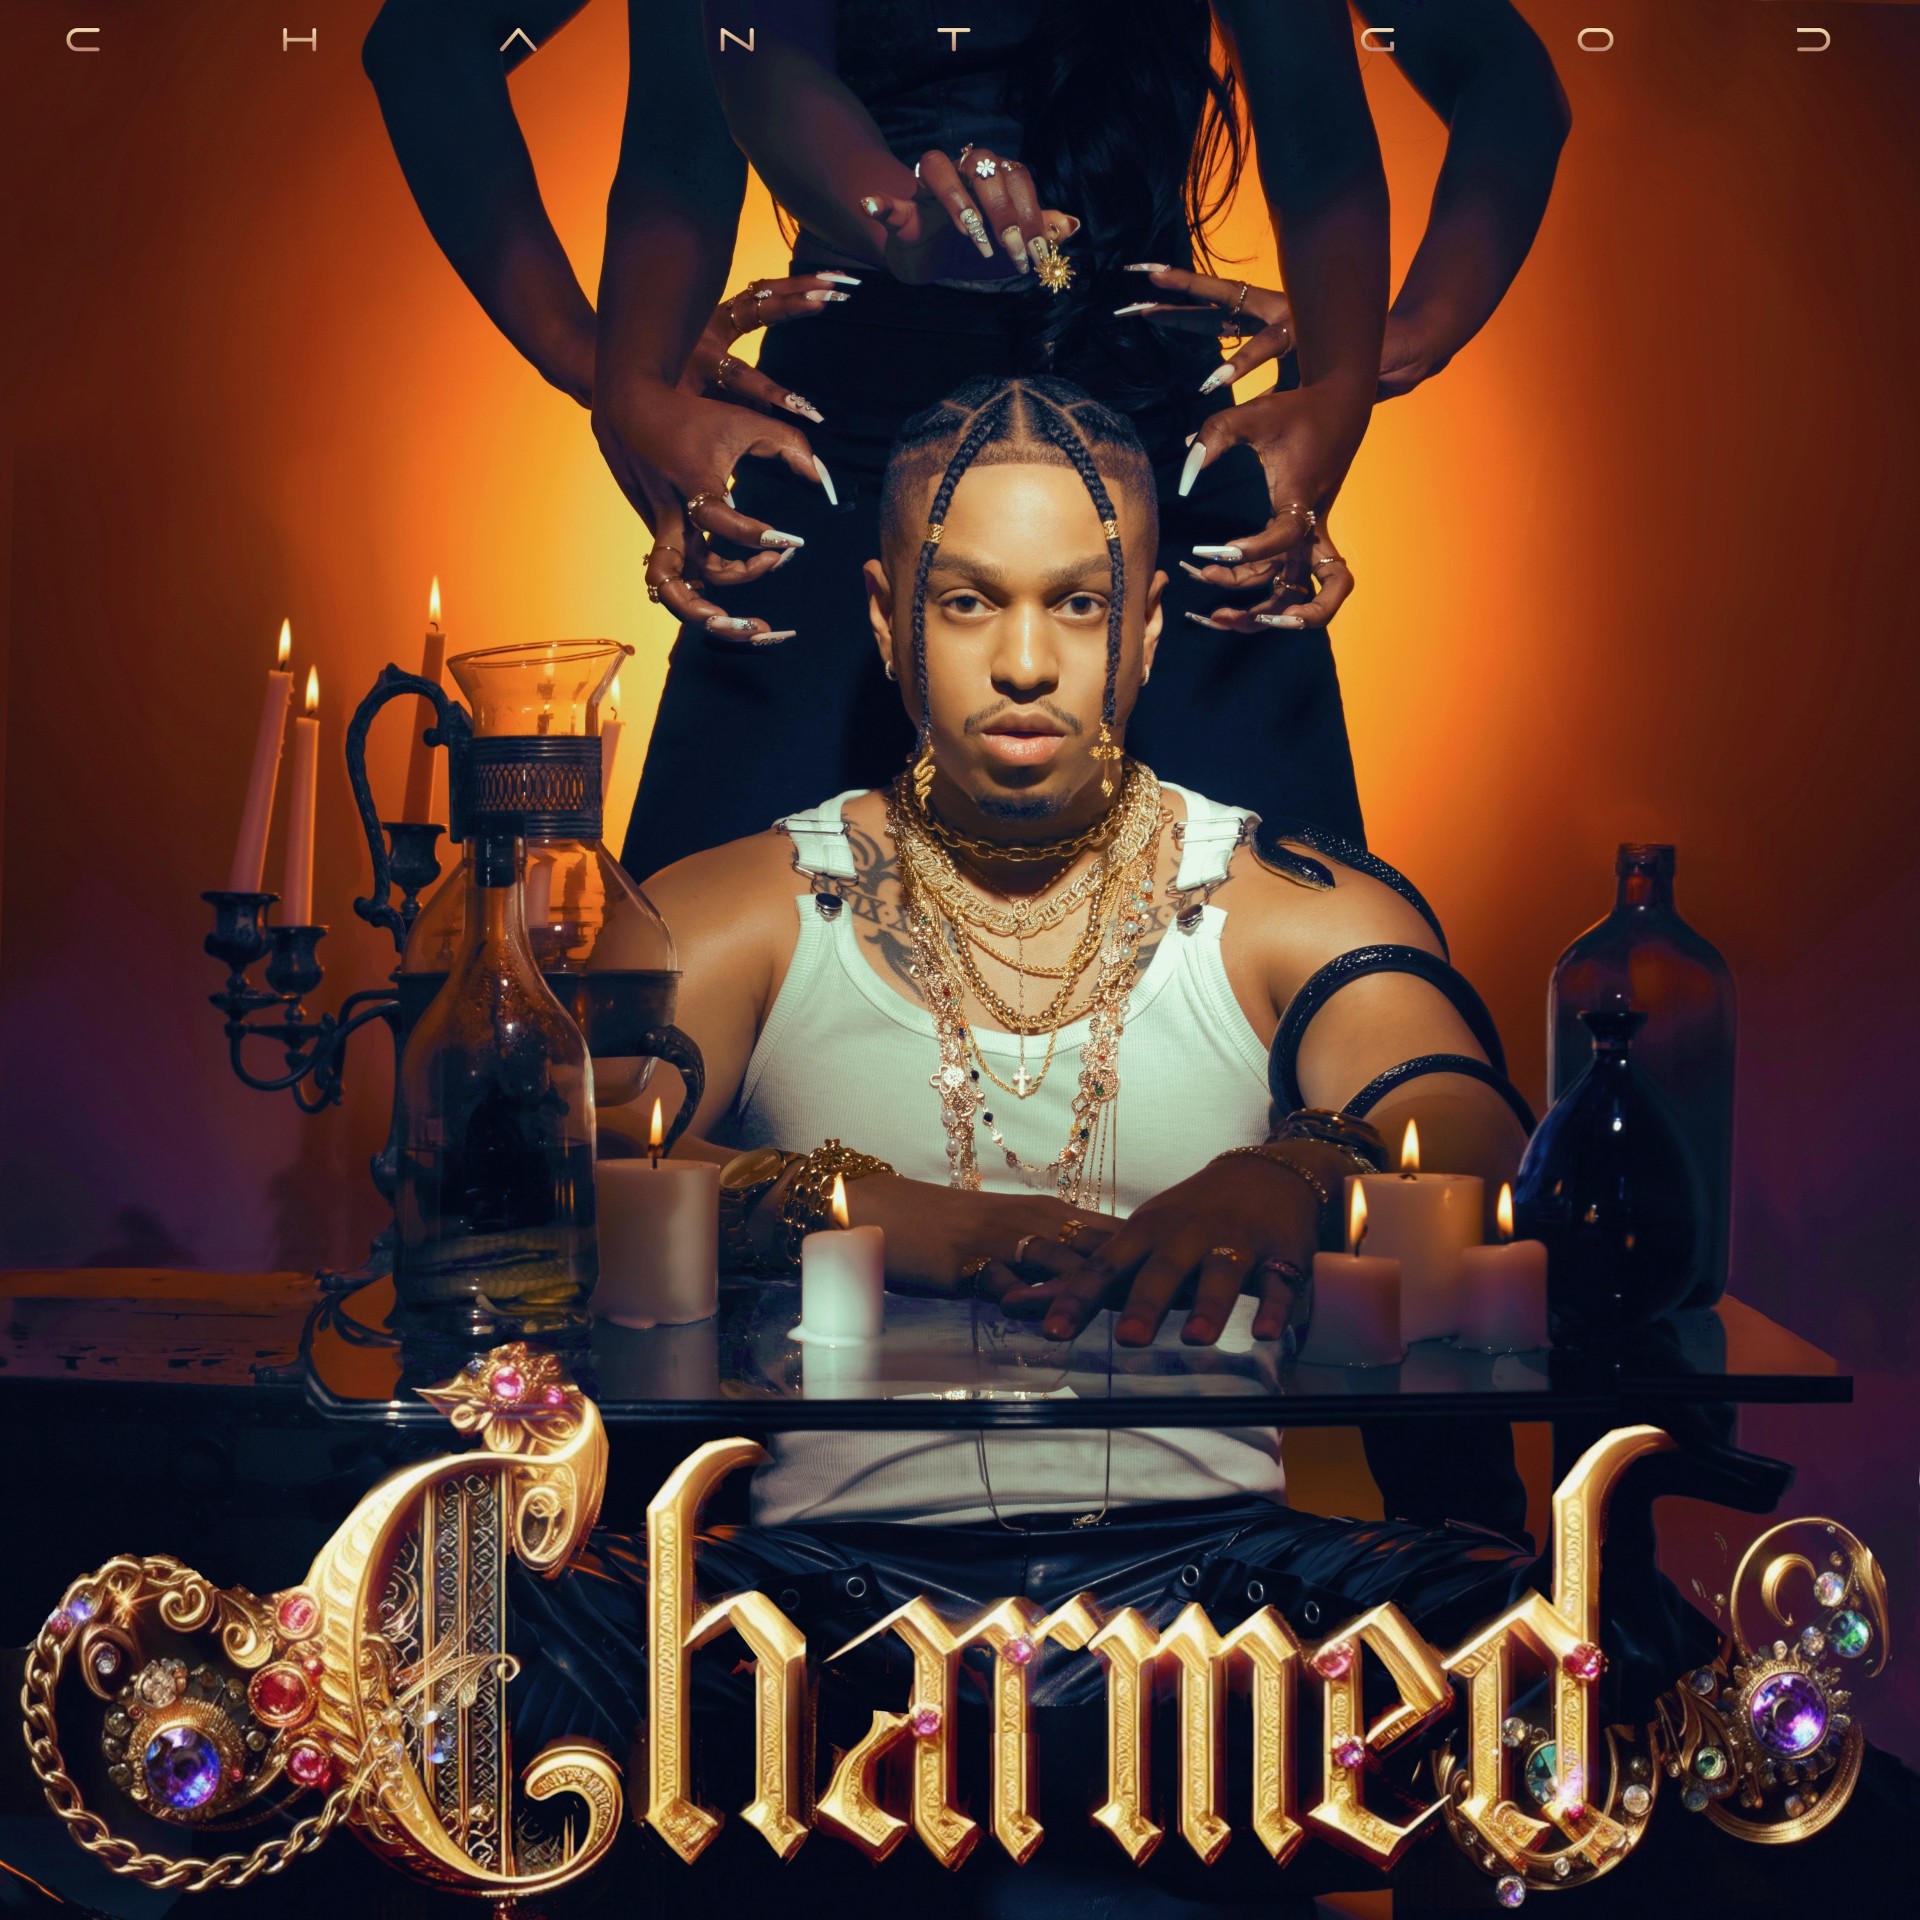 Chant God Delivers “Charmed”